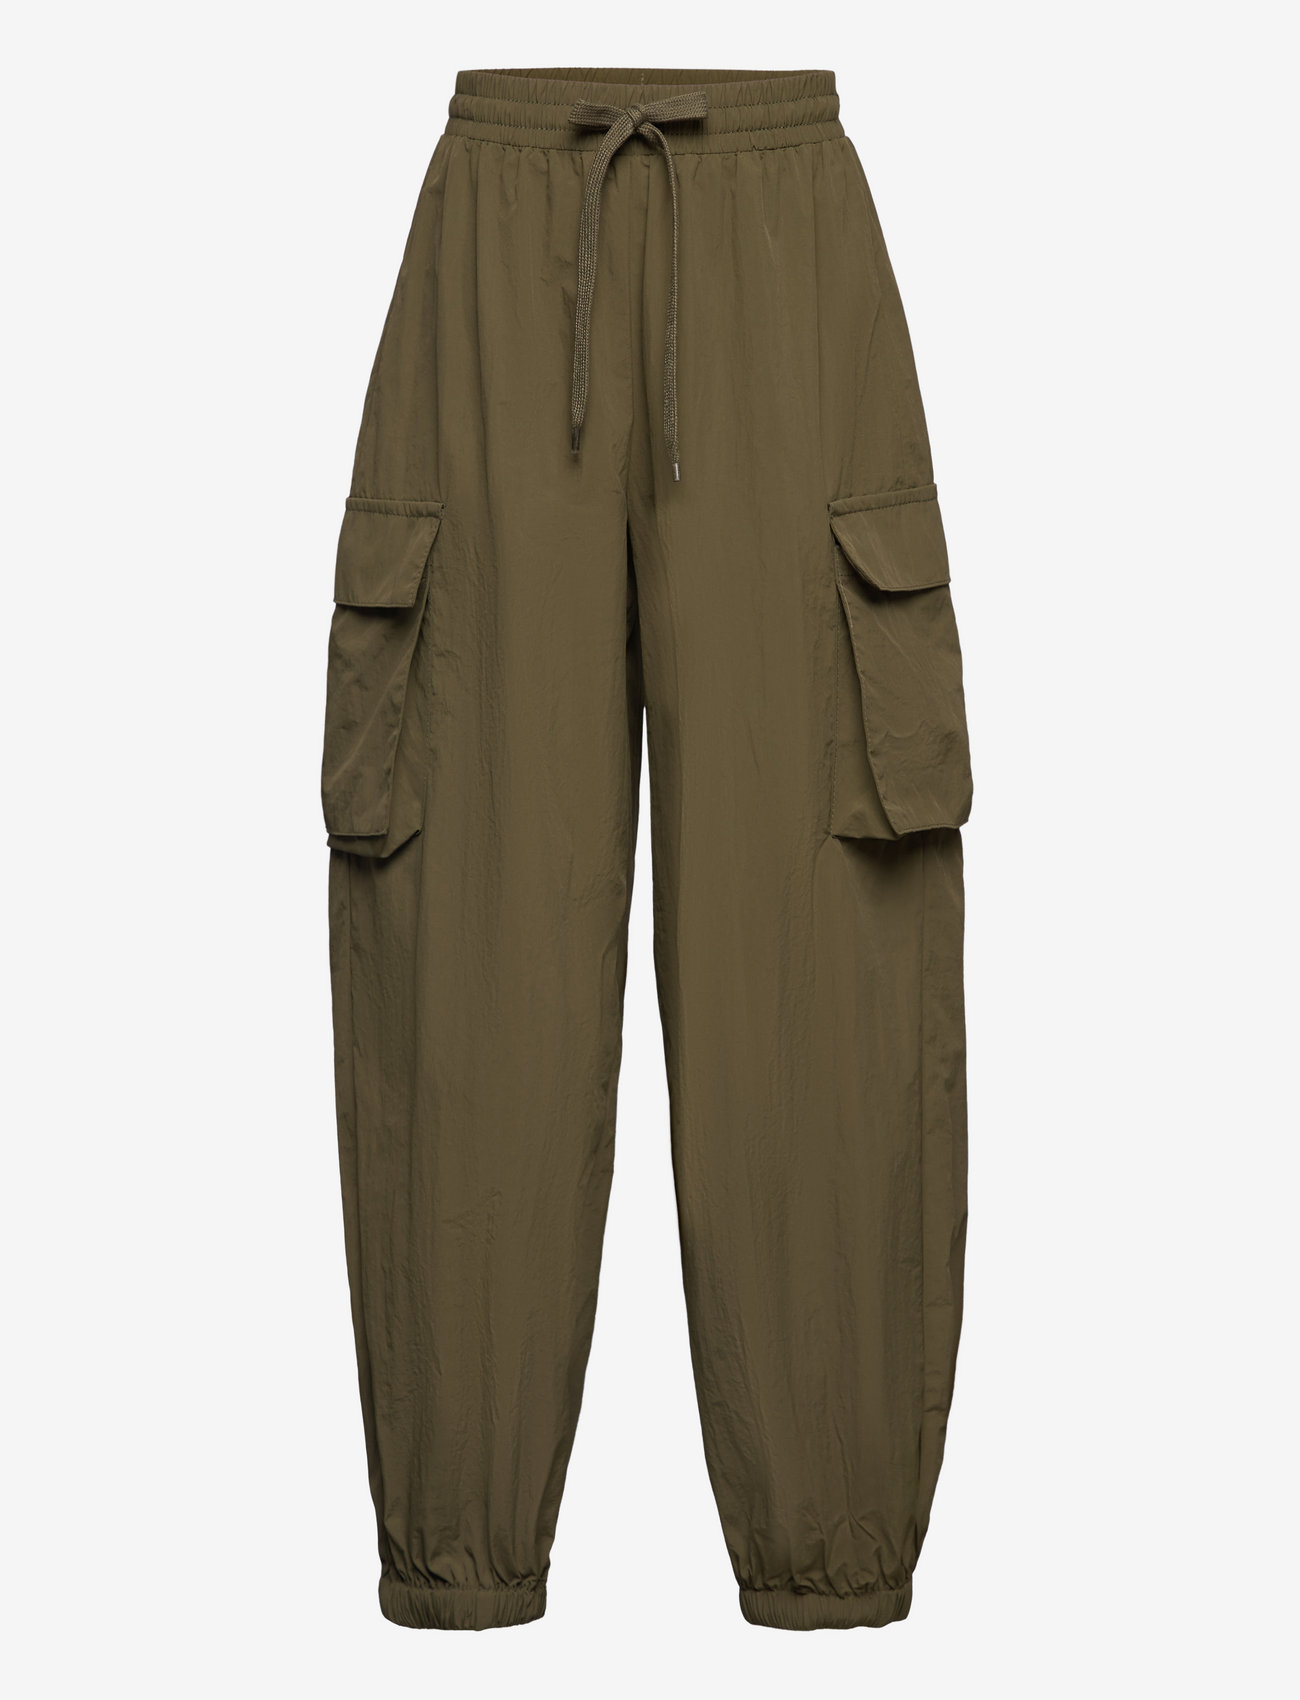 Sofie Schnoor Young - Trousers - trousers - army green - 0